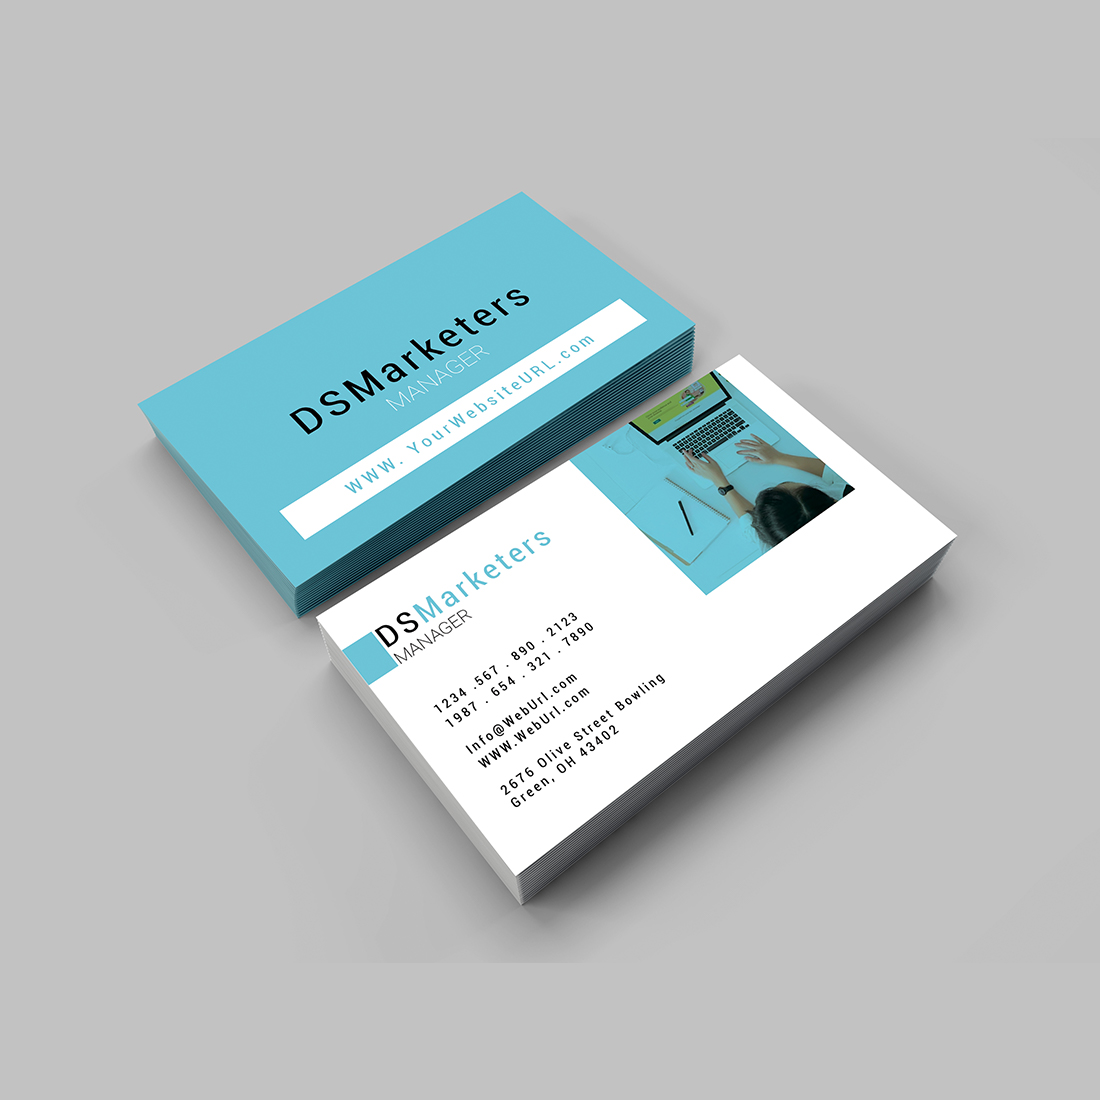 Marketing business card design cover image.